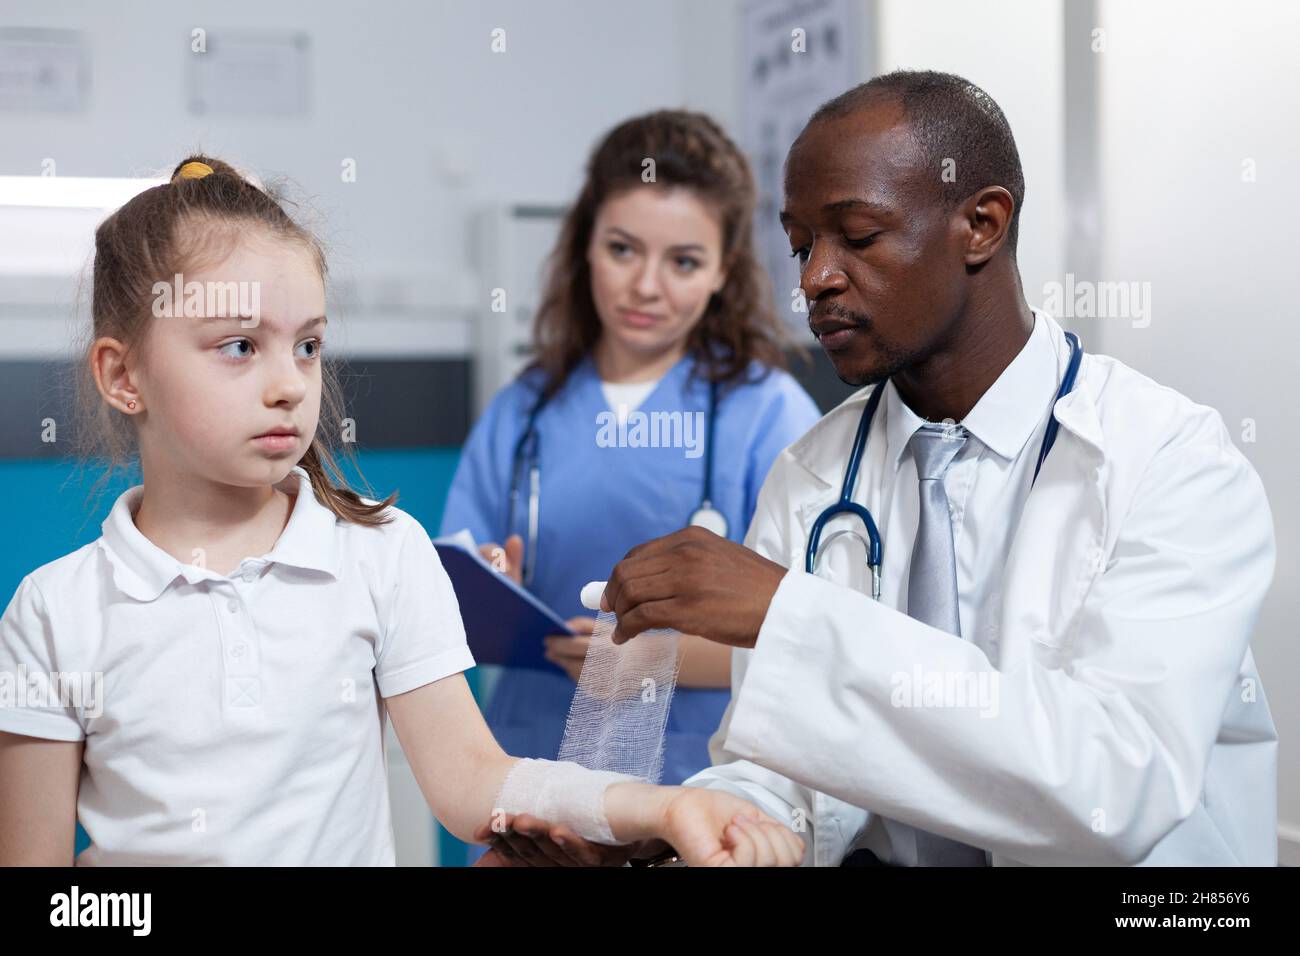 African american pediatrician doctor bandage fractured arm of girl patient during clinical inspection in hospital office. Young child having broken hand after accident. Health care service Stock Photo